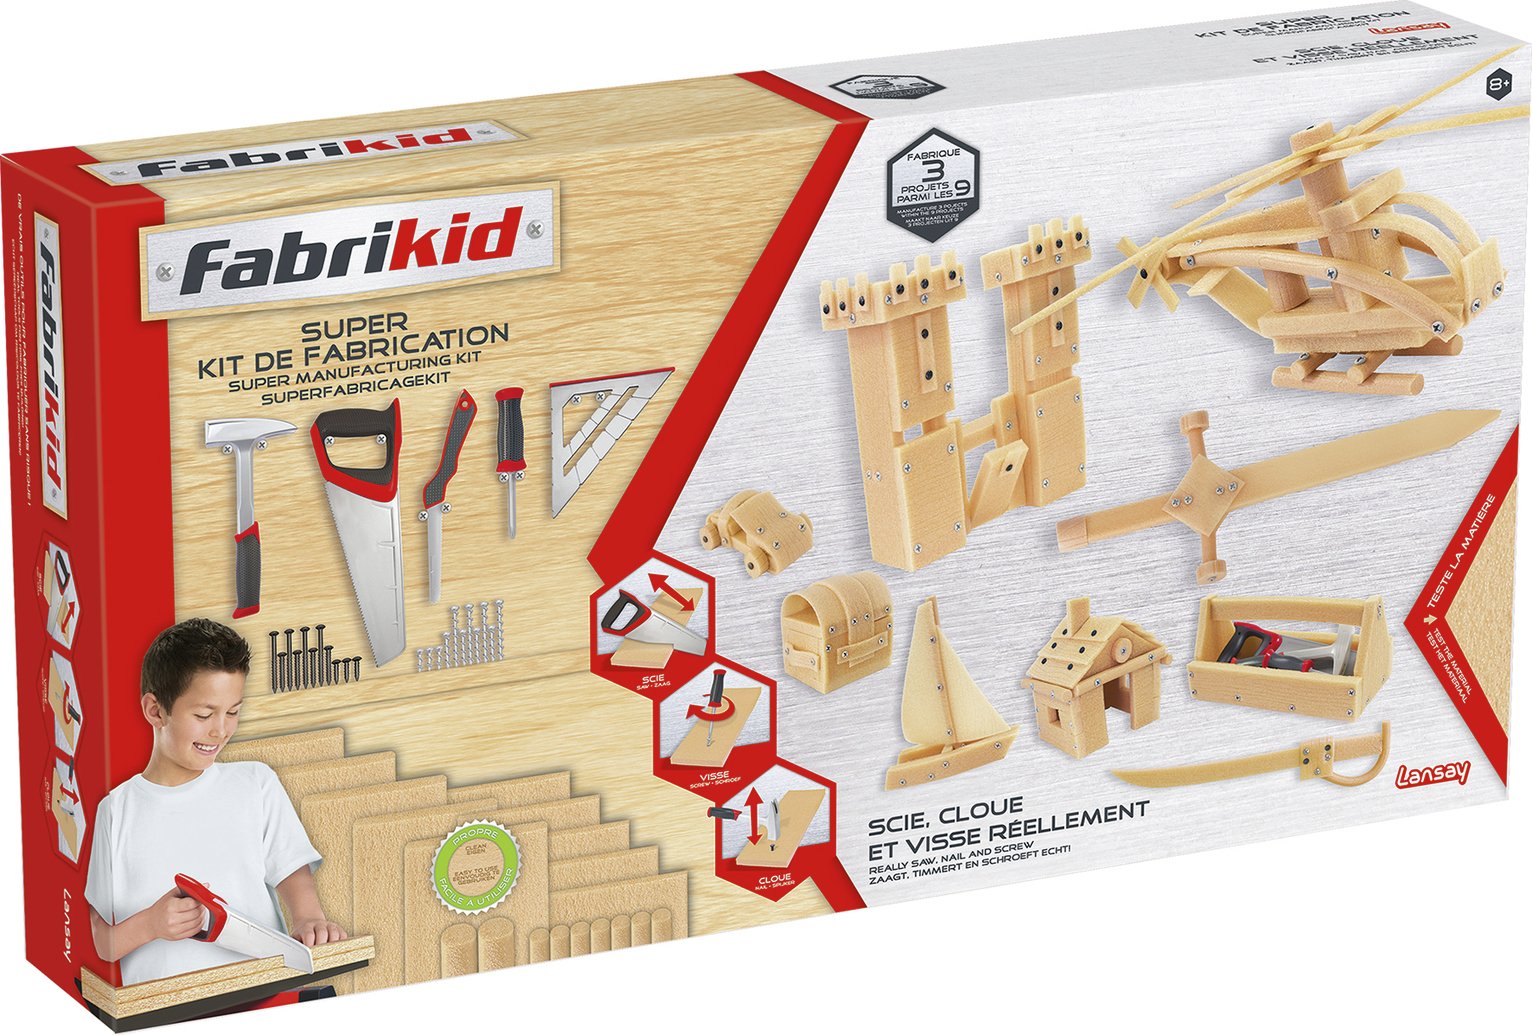 Fabrikid Super Construction Kit Review